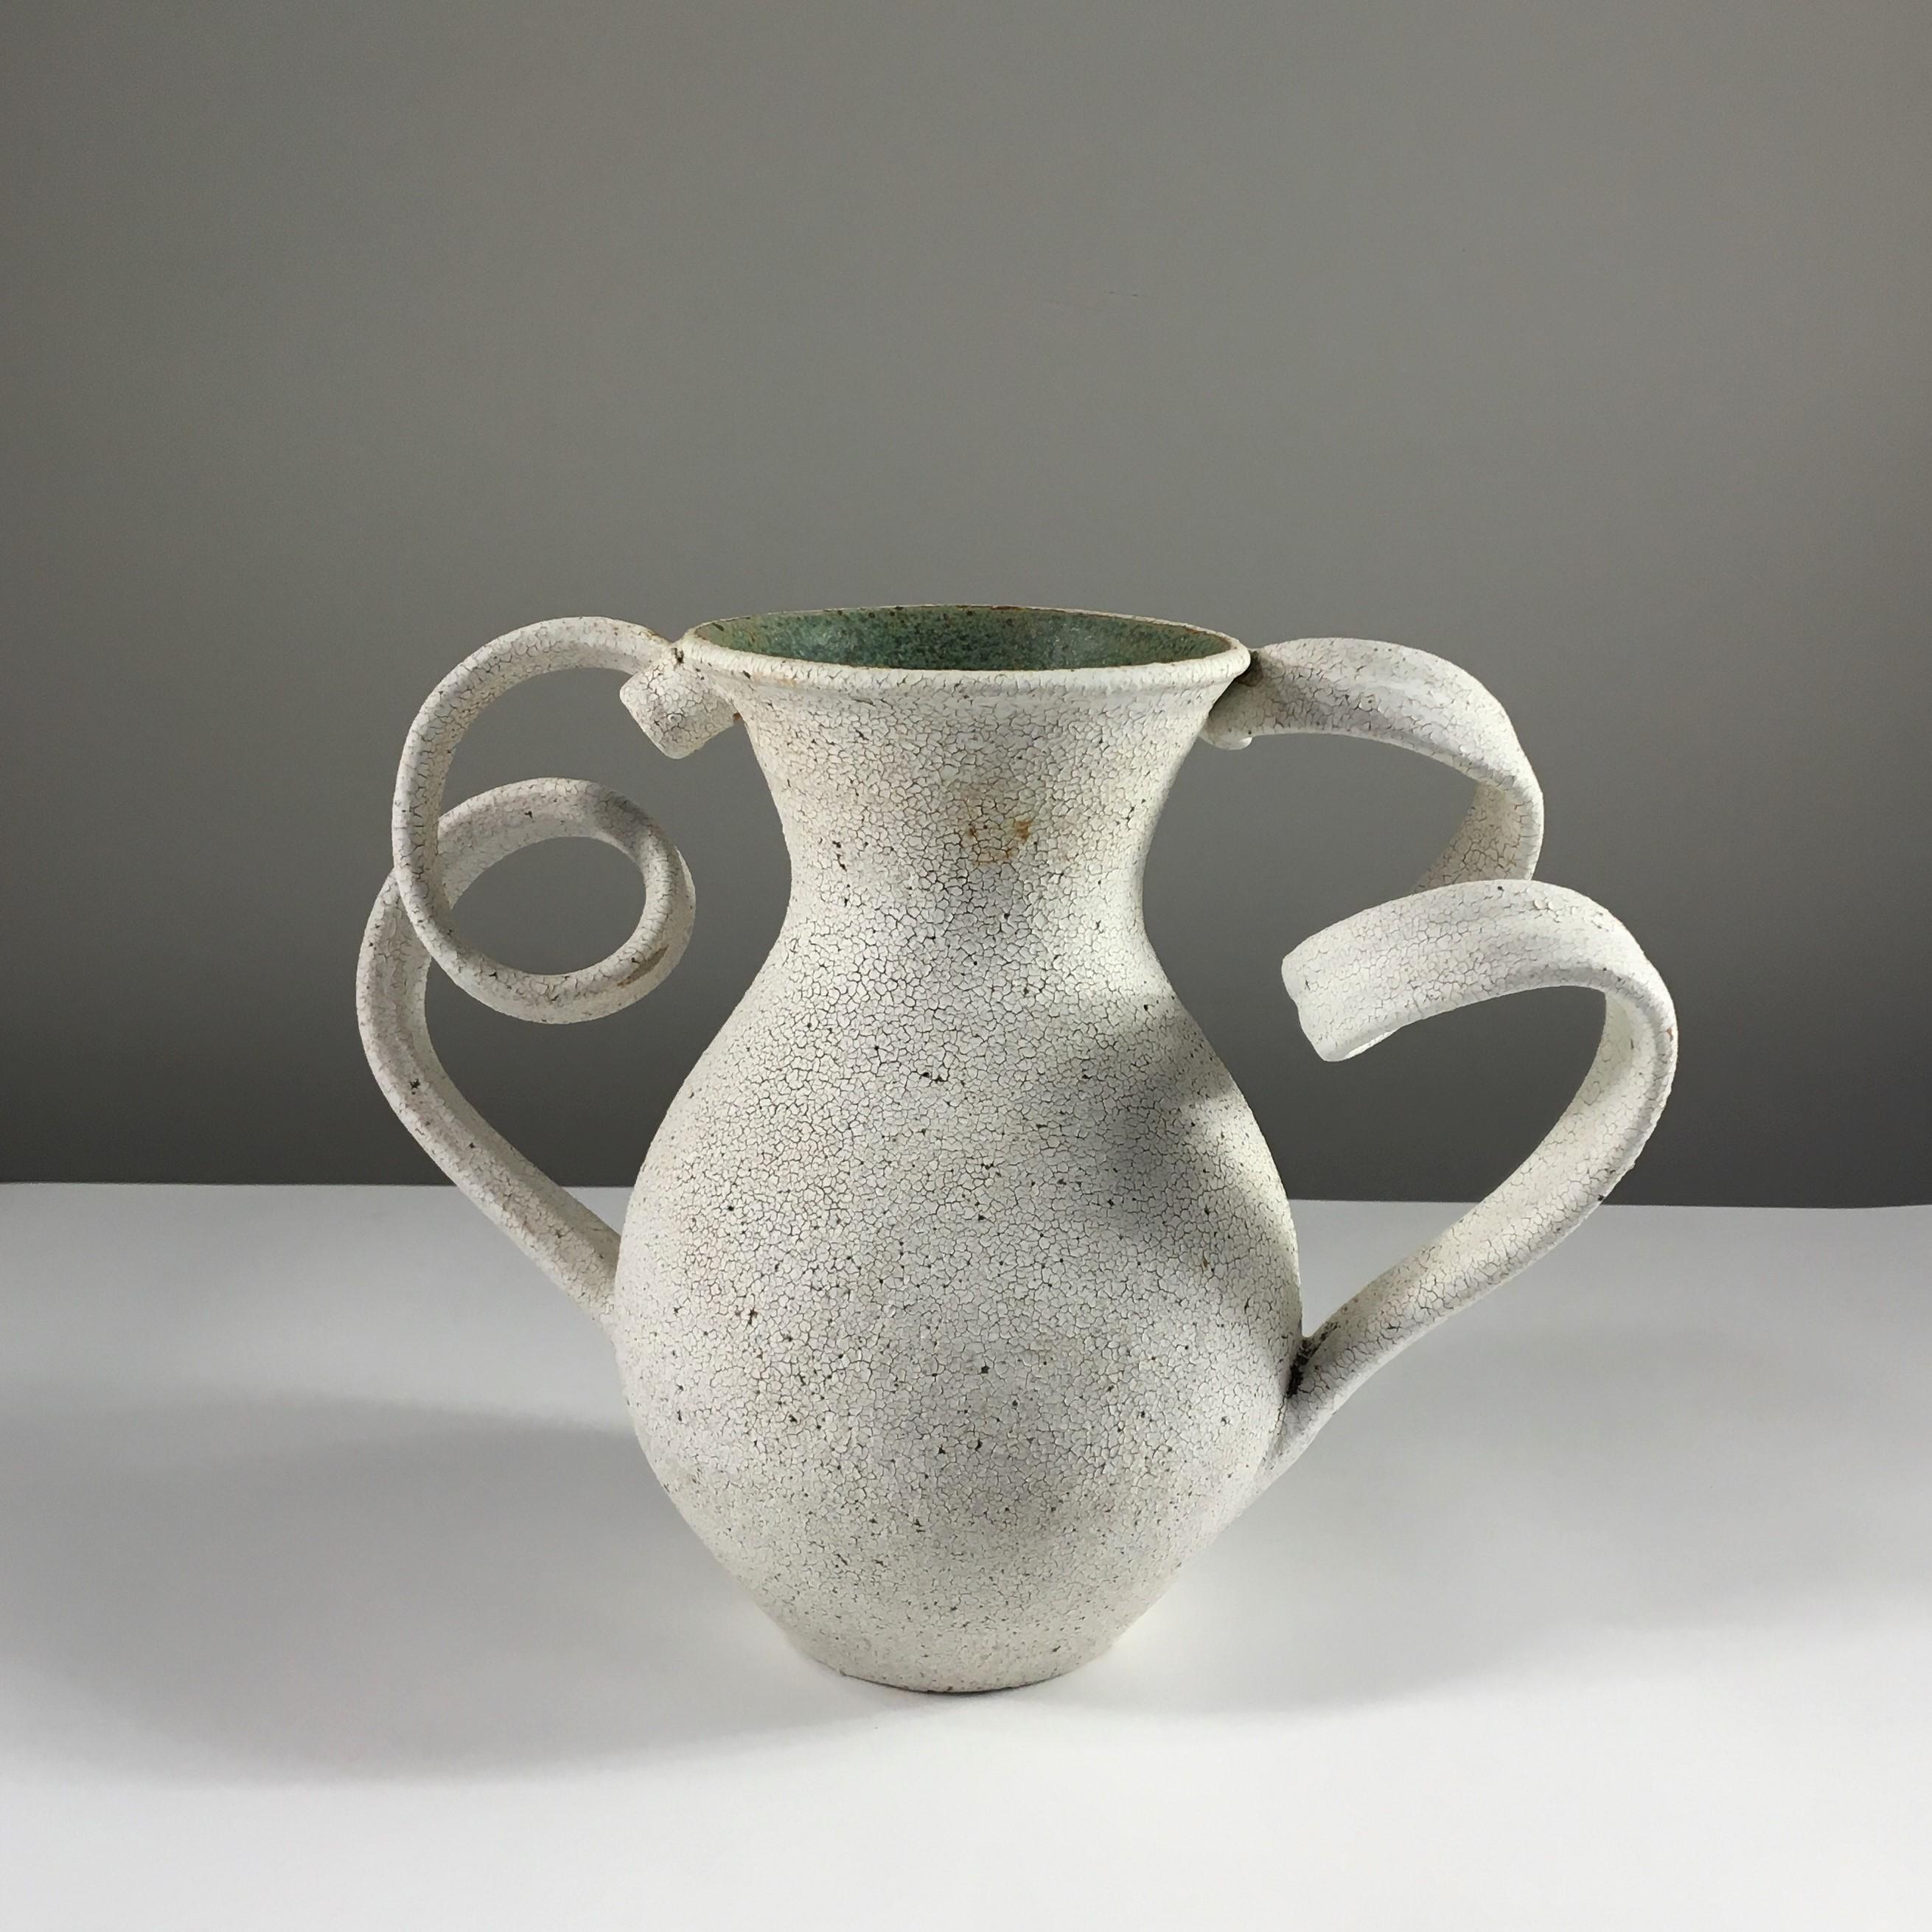 Amphora Ceramic Vase with Wide Opening by Yumiko Kuga. Dimensions:  W 11